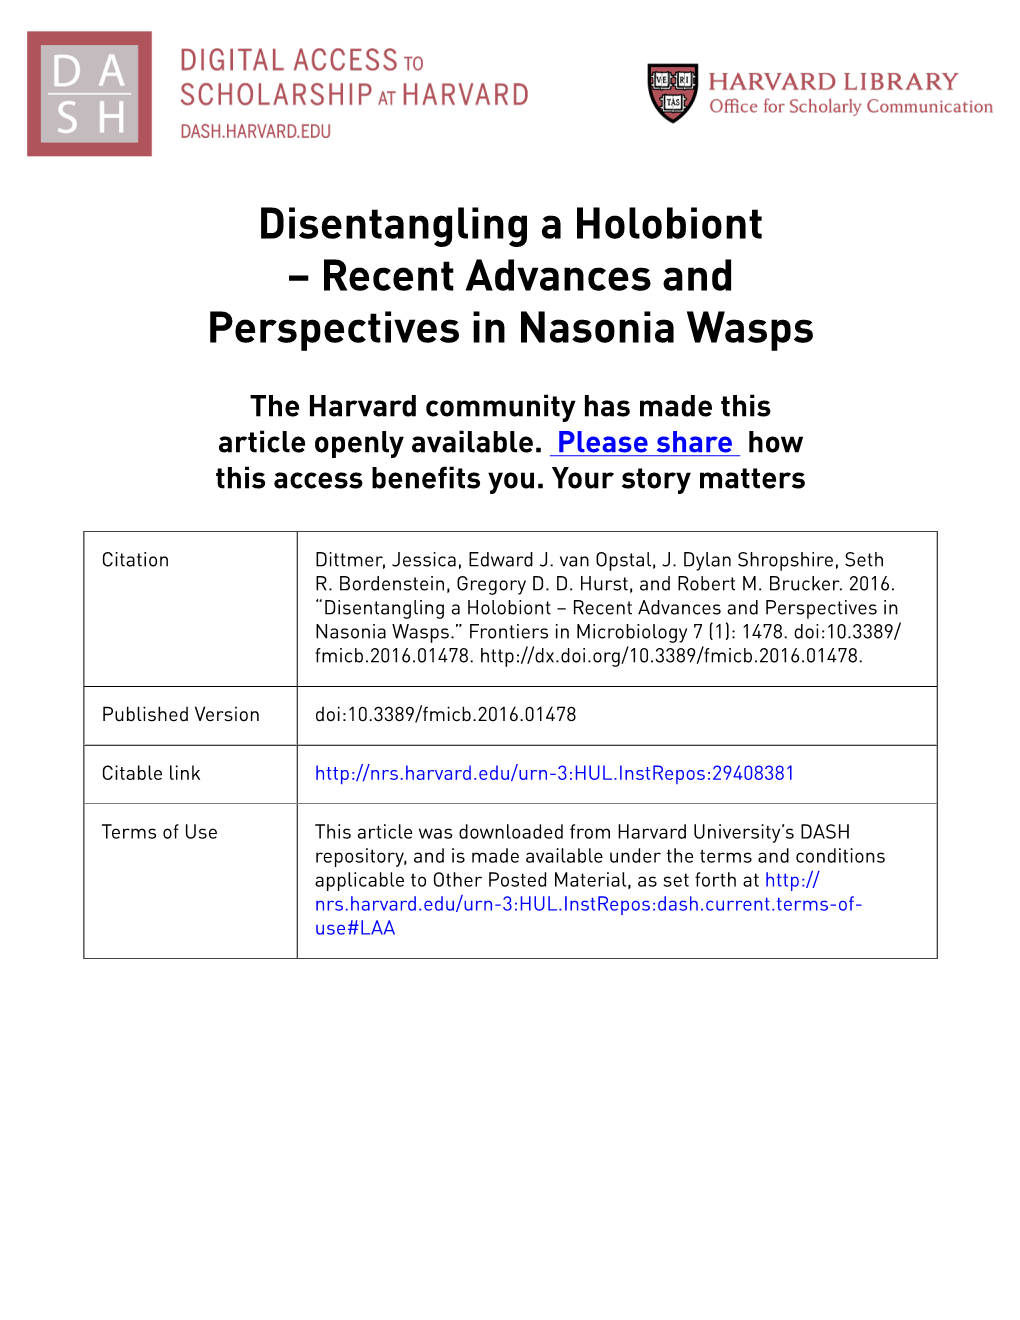 Recent Advances and Perspectives in Nasonia Wasps